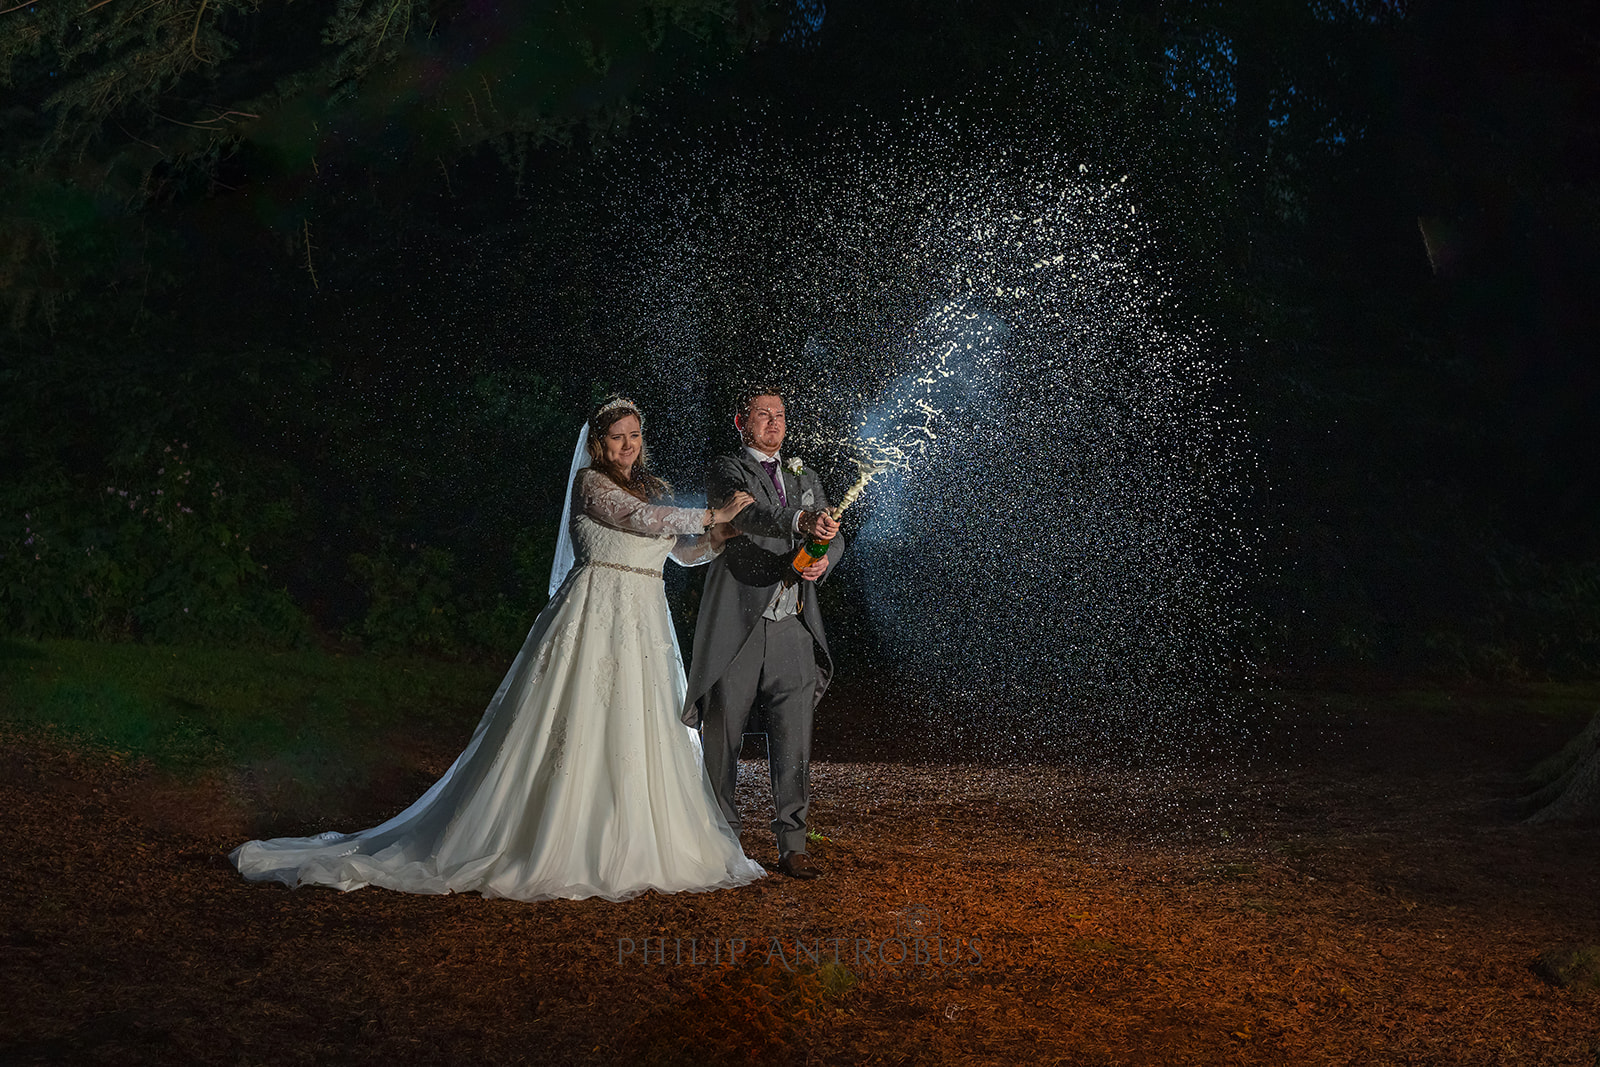 Bride and groom popping champagne at night outdoors at Chester Zoo wedding.